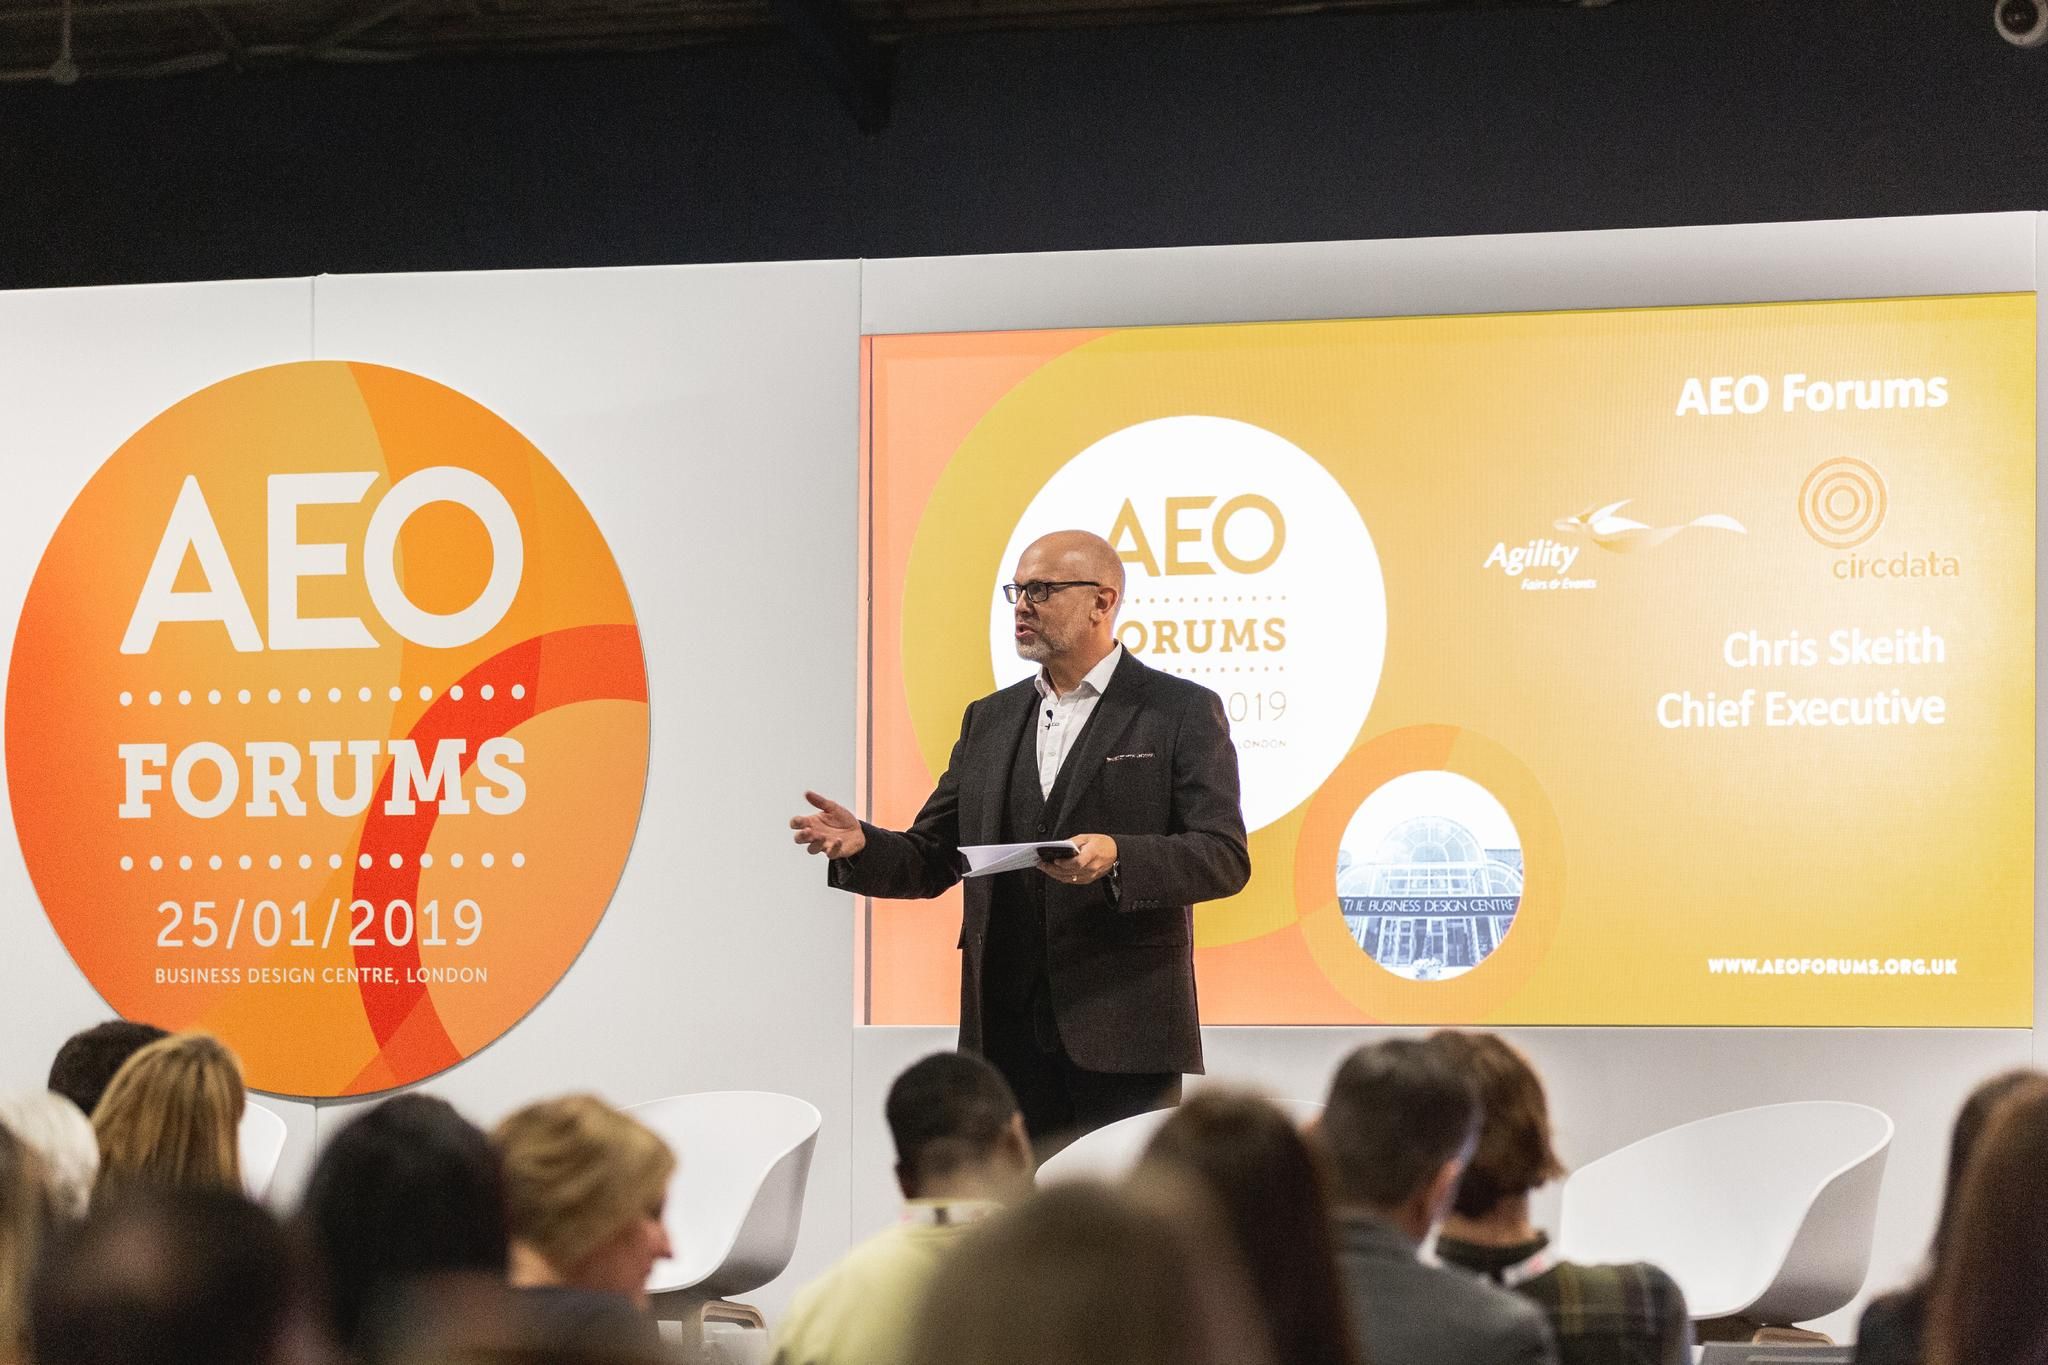 AEO Forums Hits the Spot for Event Industry Leaders of Tomorrow